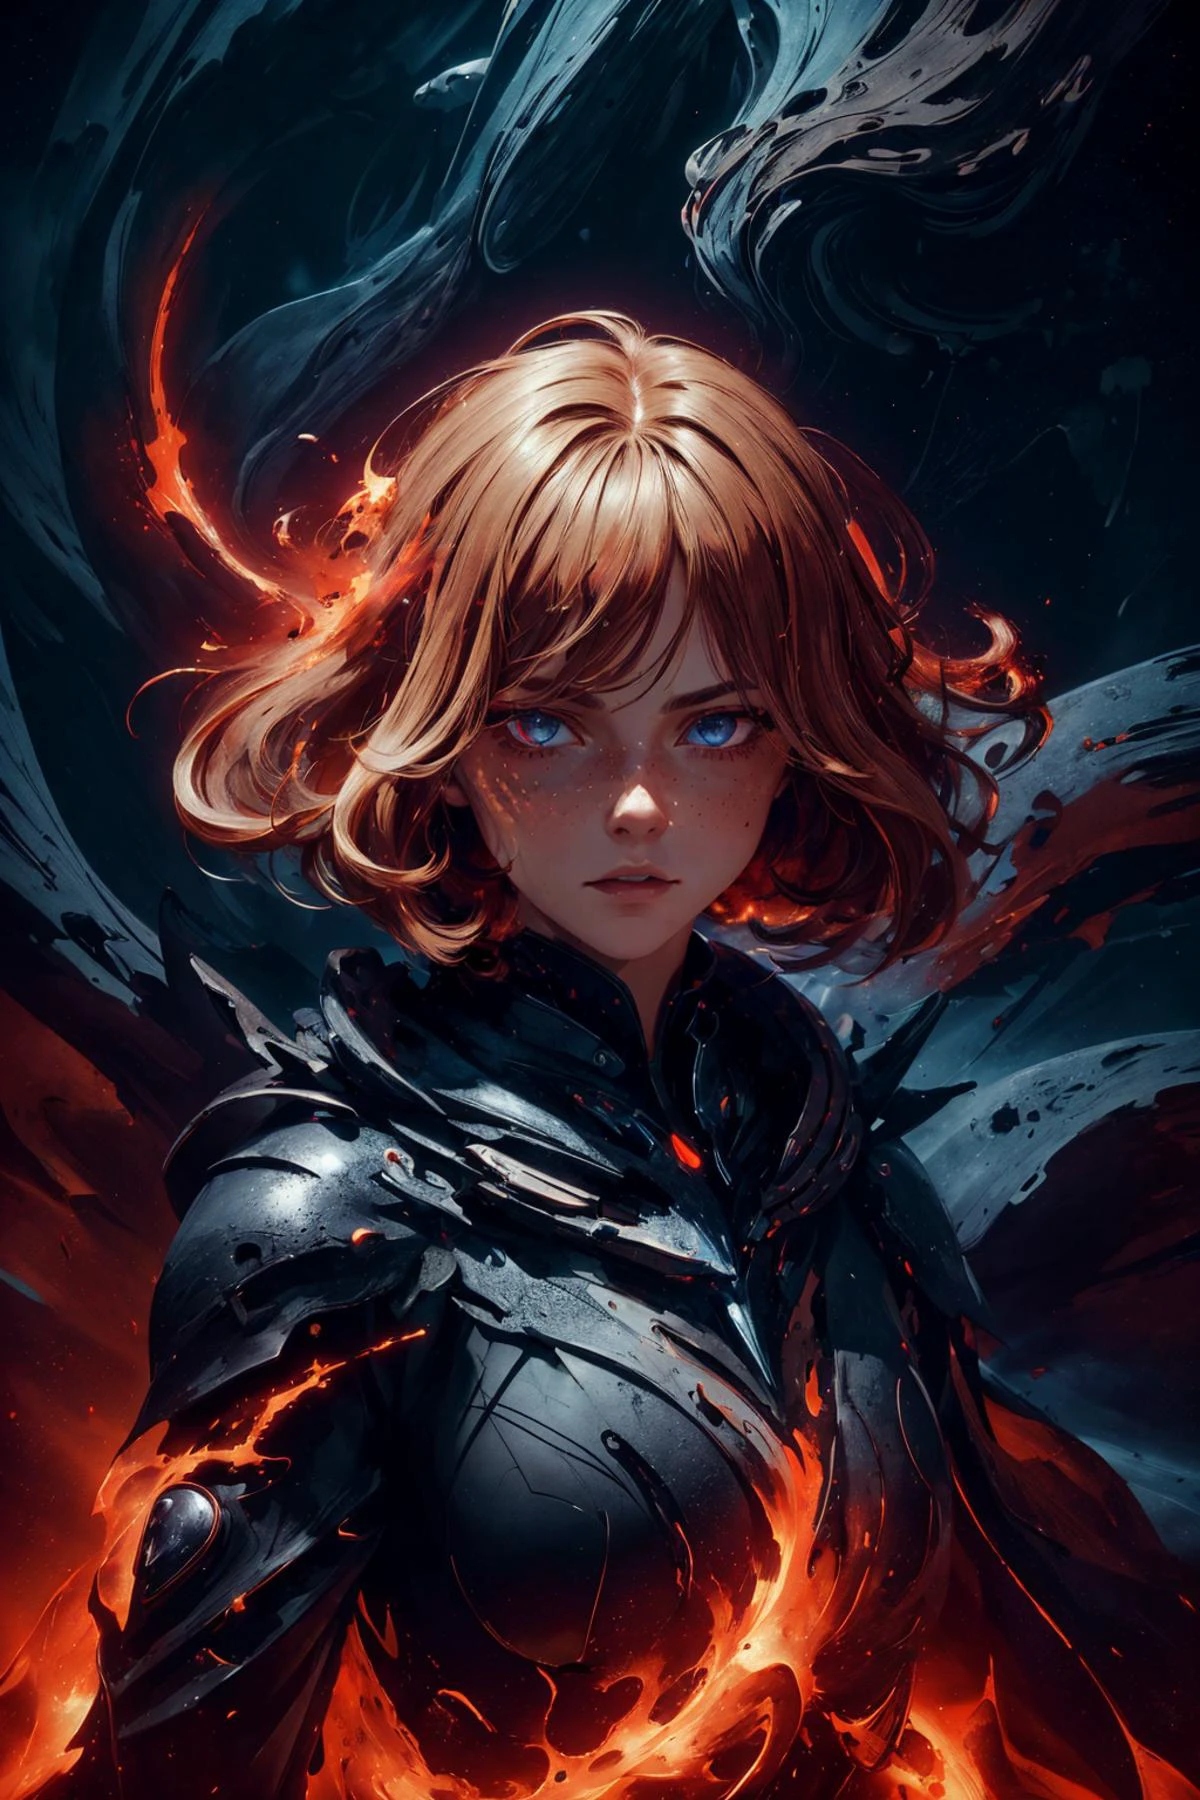 maximum details, cinematic, (abstract art:1.1), dark theme,  deep shadow, 1 girl, adult (elven:0.7) woman, freckles, coral eyes, natural blonde medium hair, 
portrait, solo, half shot, detailed background, detailed face, (lava, MagmaTech theme:1.1), (glowing eyes:1.05), angry expression, dark warrior, unholy, red clothes, plated armor, cape, evil royal black crown,  floating particles, embers, vultures in background, dark tower in background, shadowy dark sinister atmosphere,  
